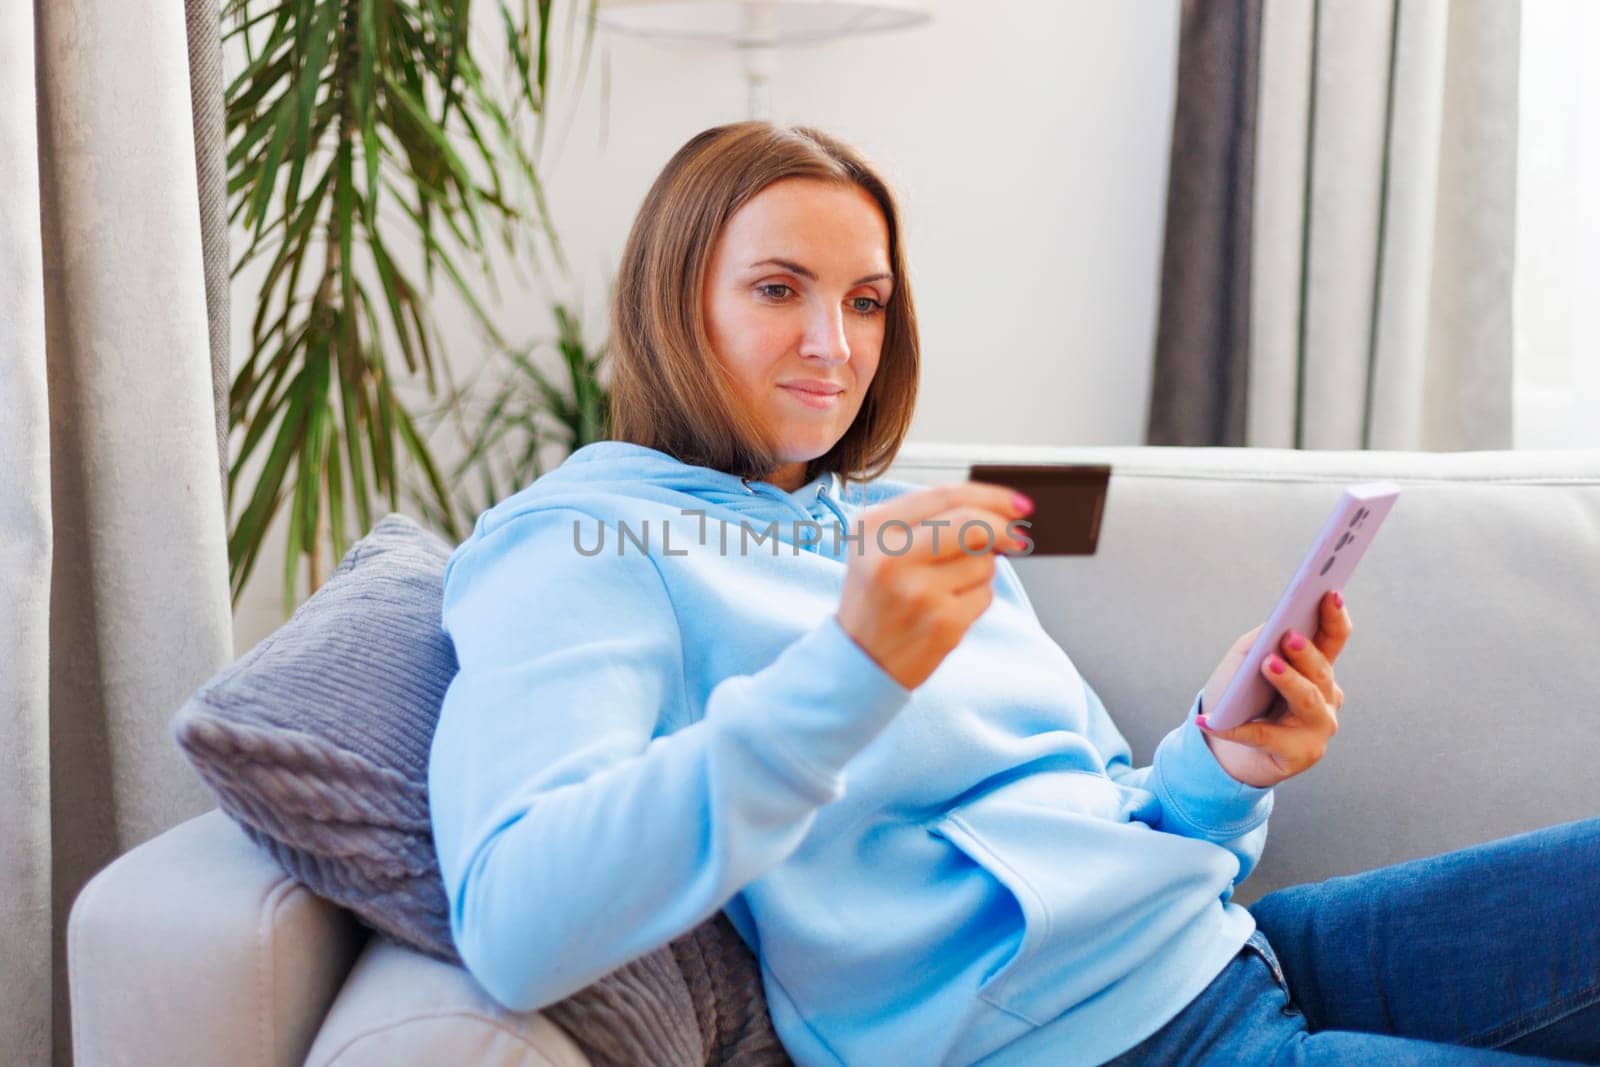 Woman sitting on a couch at home shopping online with a credit card and smartphone. Interior lifestyle portrait. E-commerce and online shopping concept. Design for banner, poster, website header.